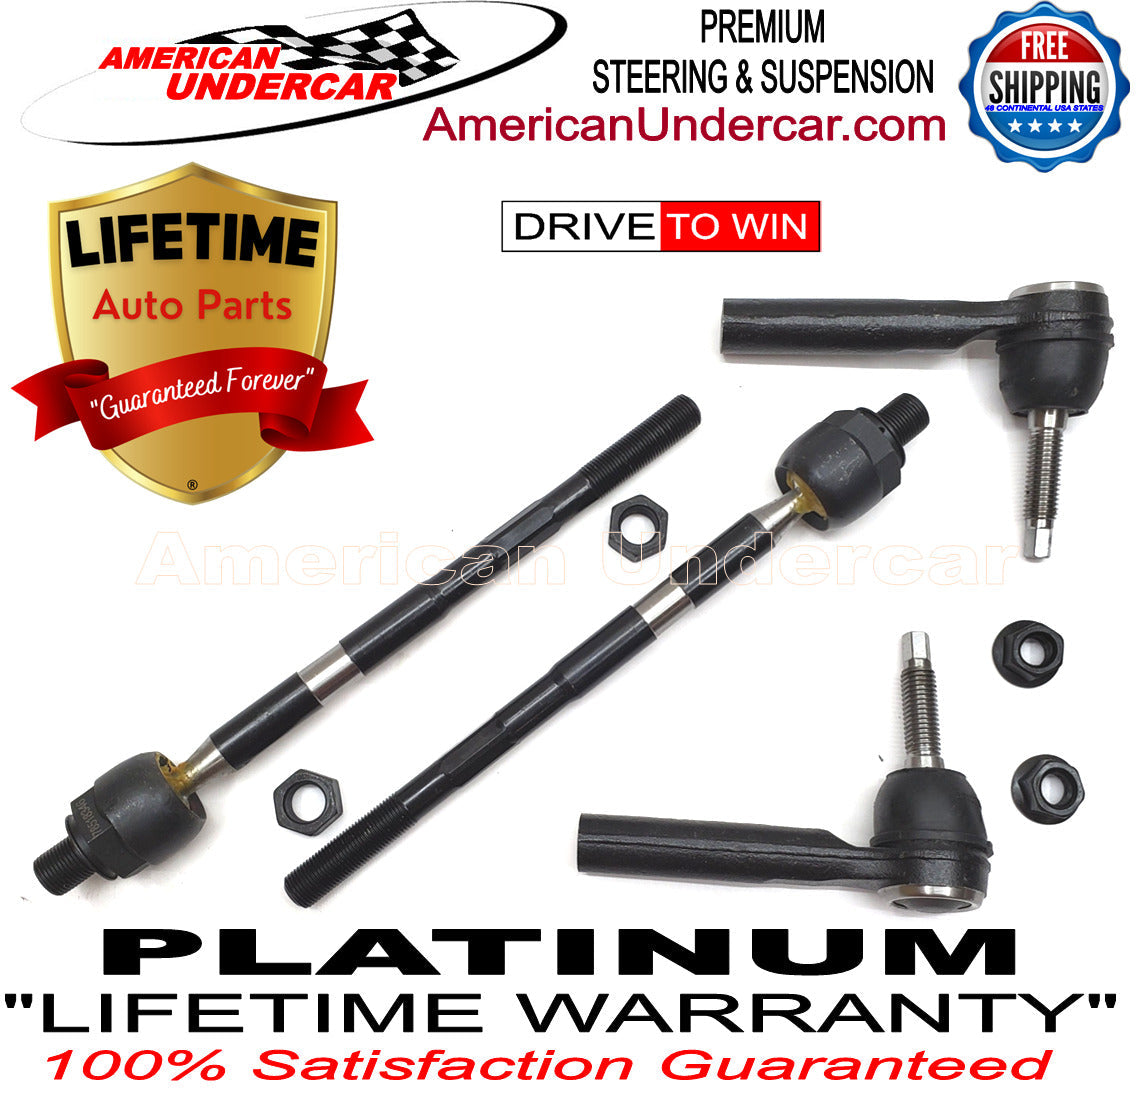 Lifetime Inner & Outer Tie Rod Steering Kit for 2007-2010 Saturn Outlook 2WD, AWD